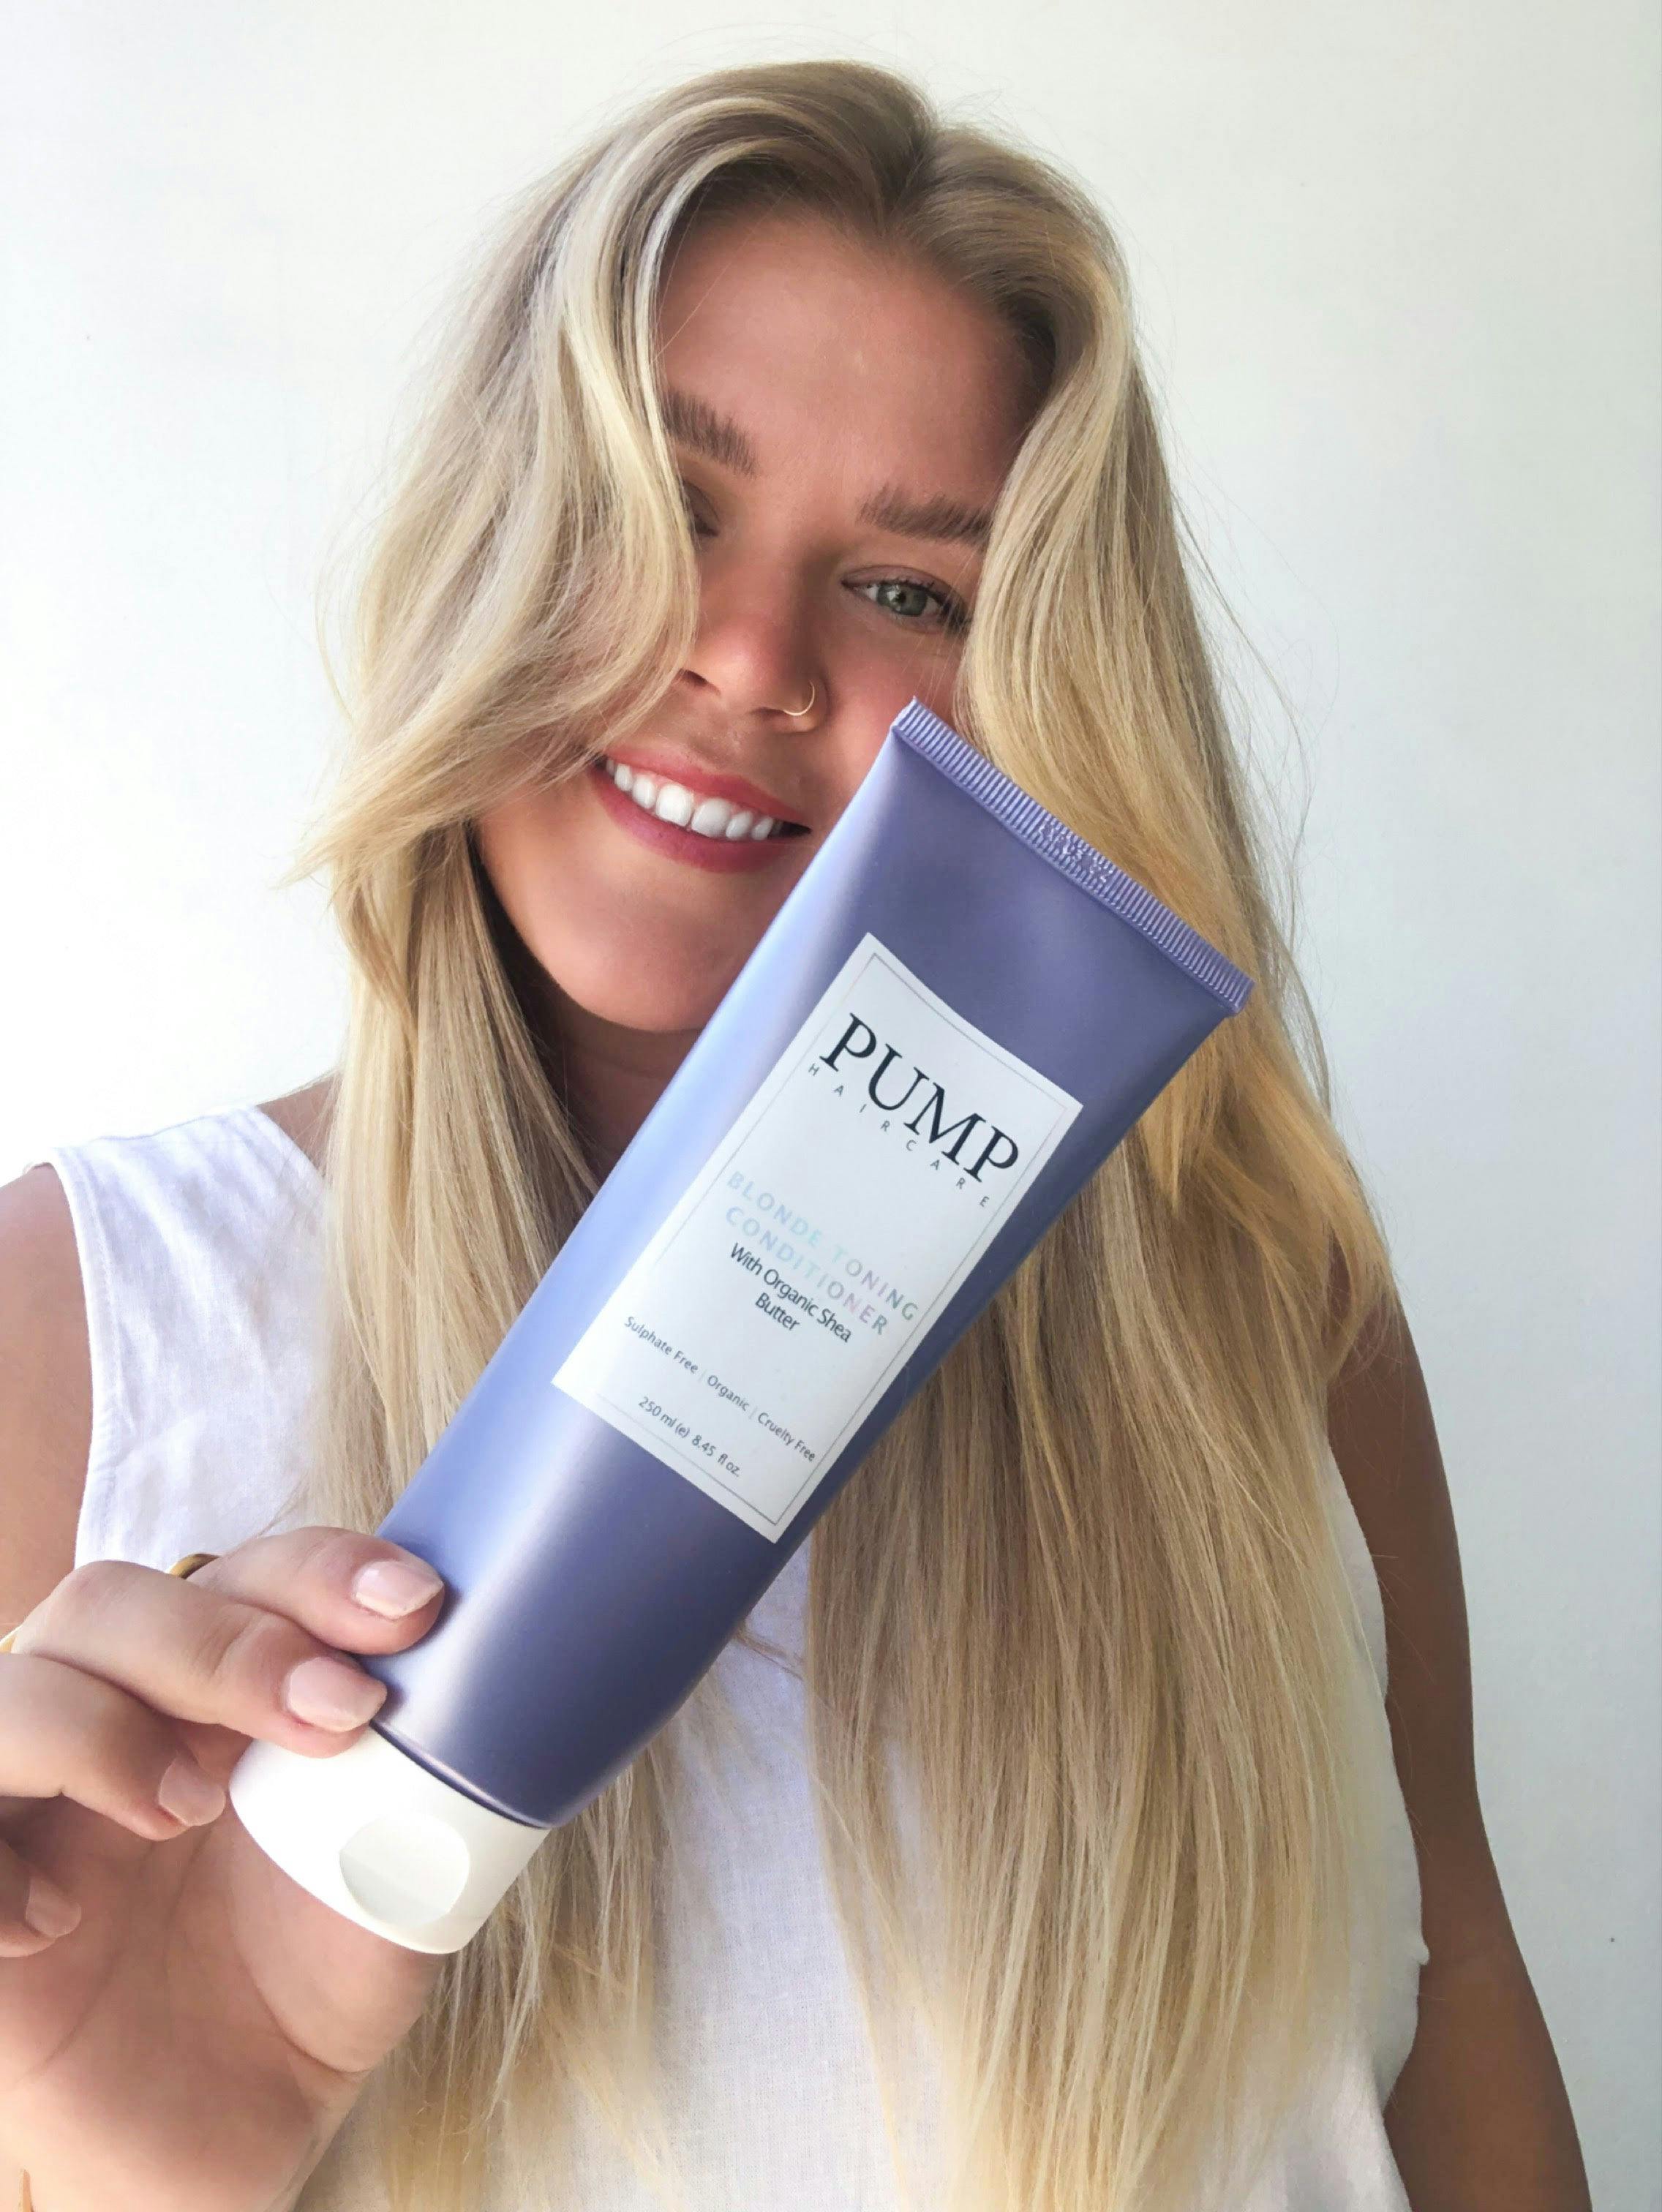 Pump Haircare Blonde Toning Conditioner 250ml